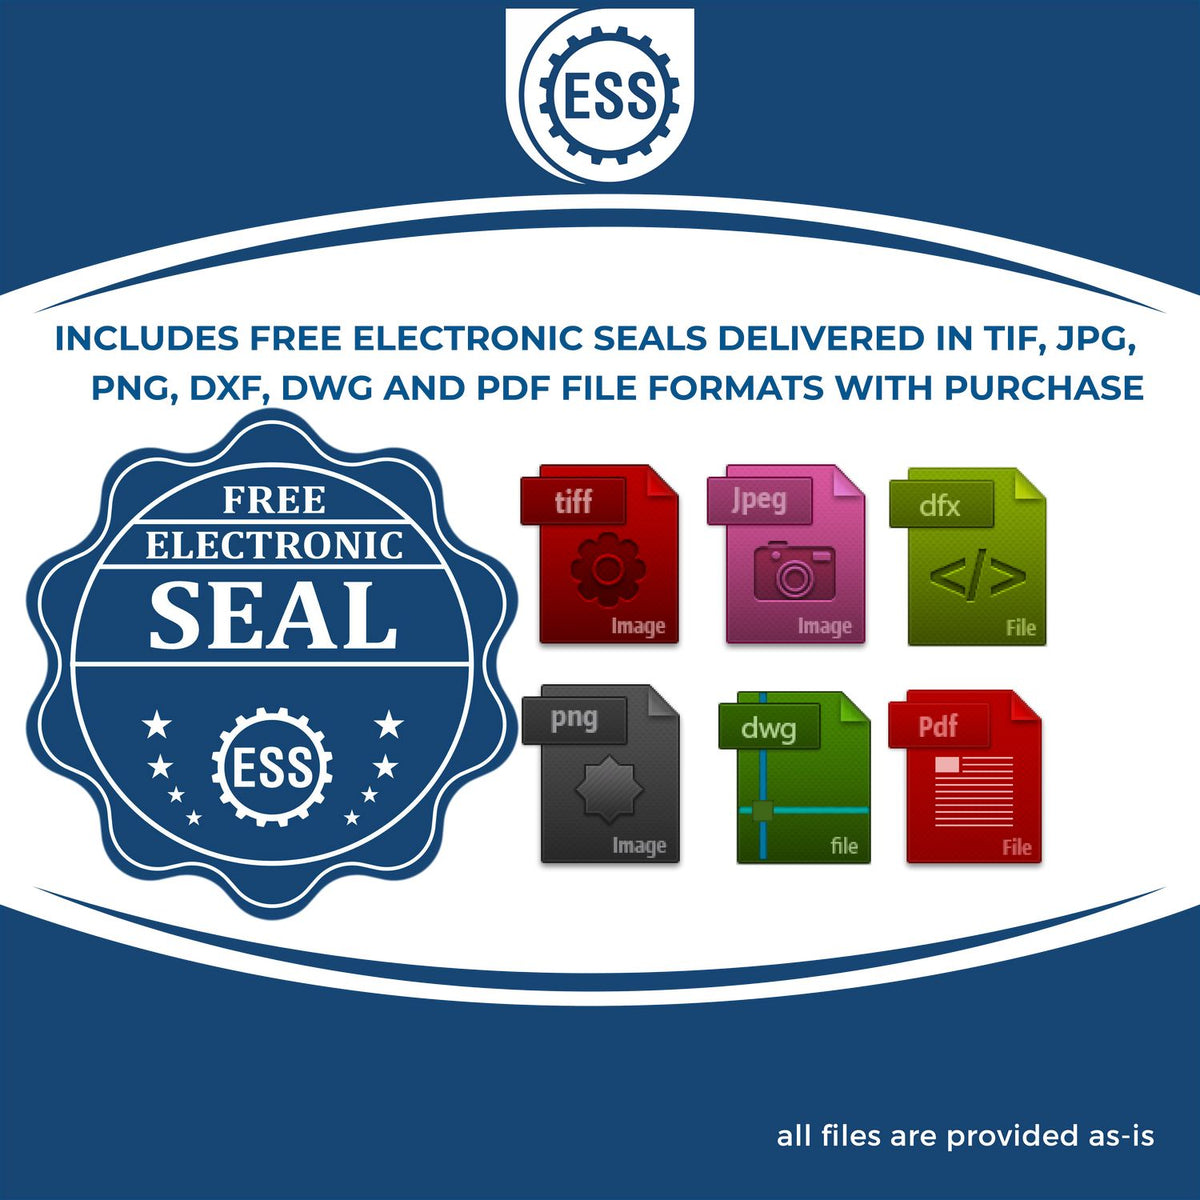 An infographic for the free electronic seal for the Self-Inking Washington PE Stamp illustrating the different file type icons such as DXF, DWG, TIF, JPG and PNG.